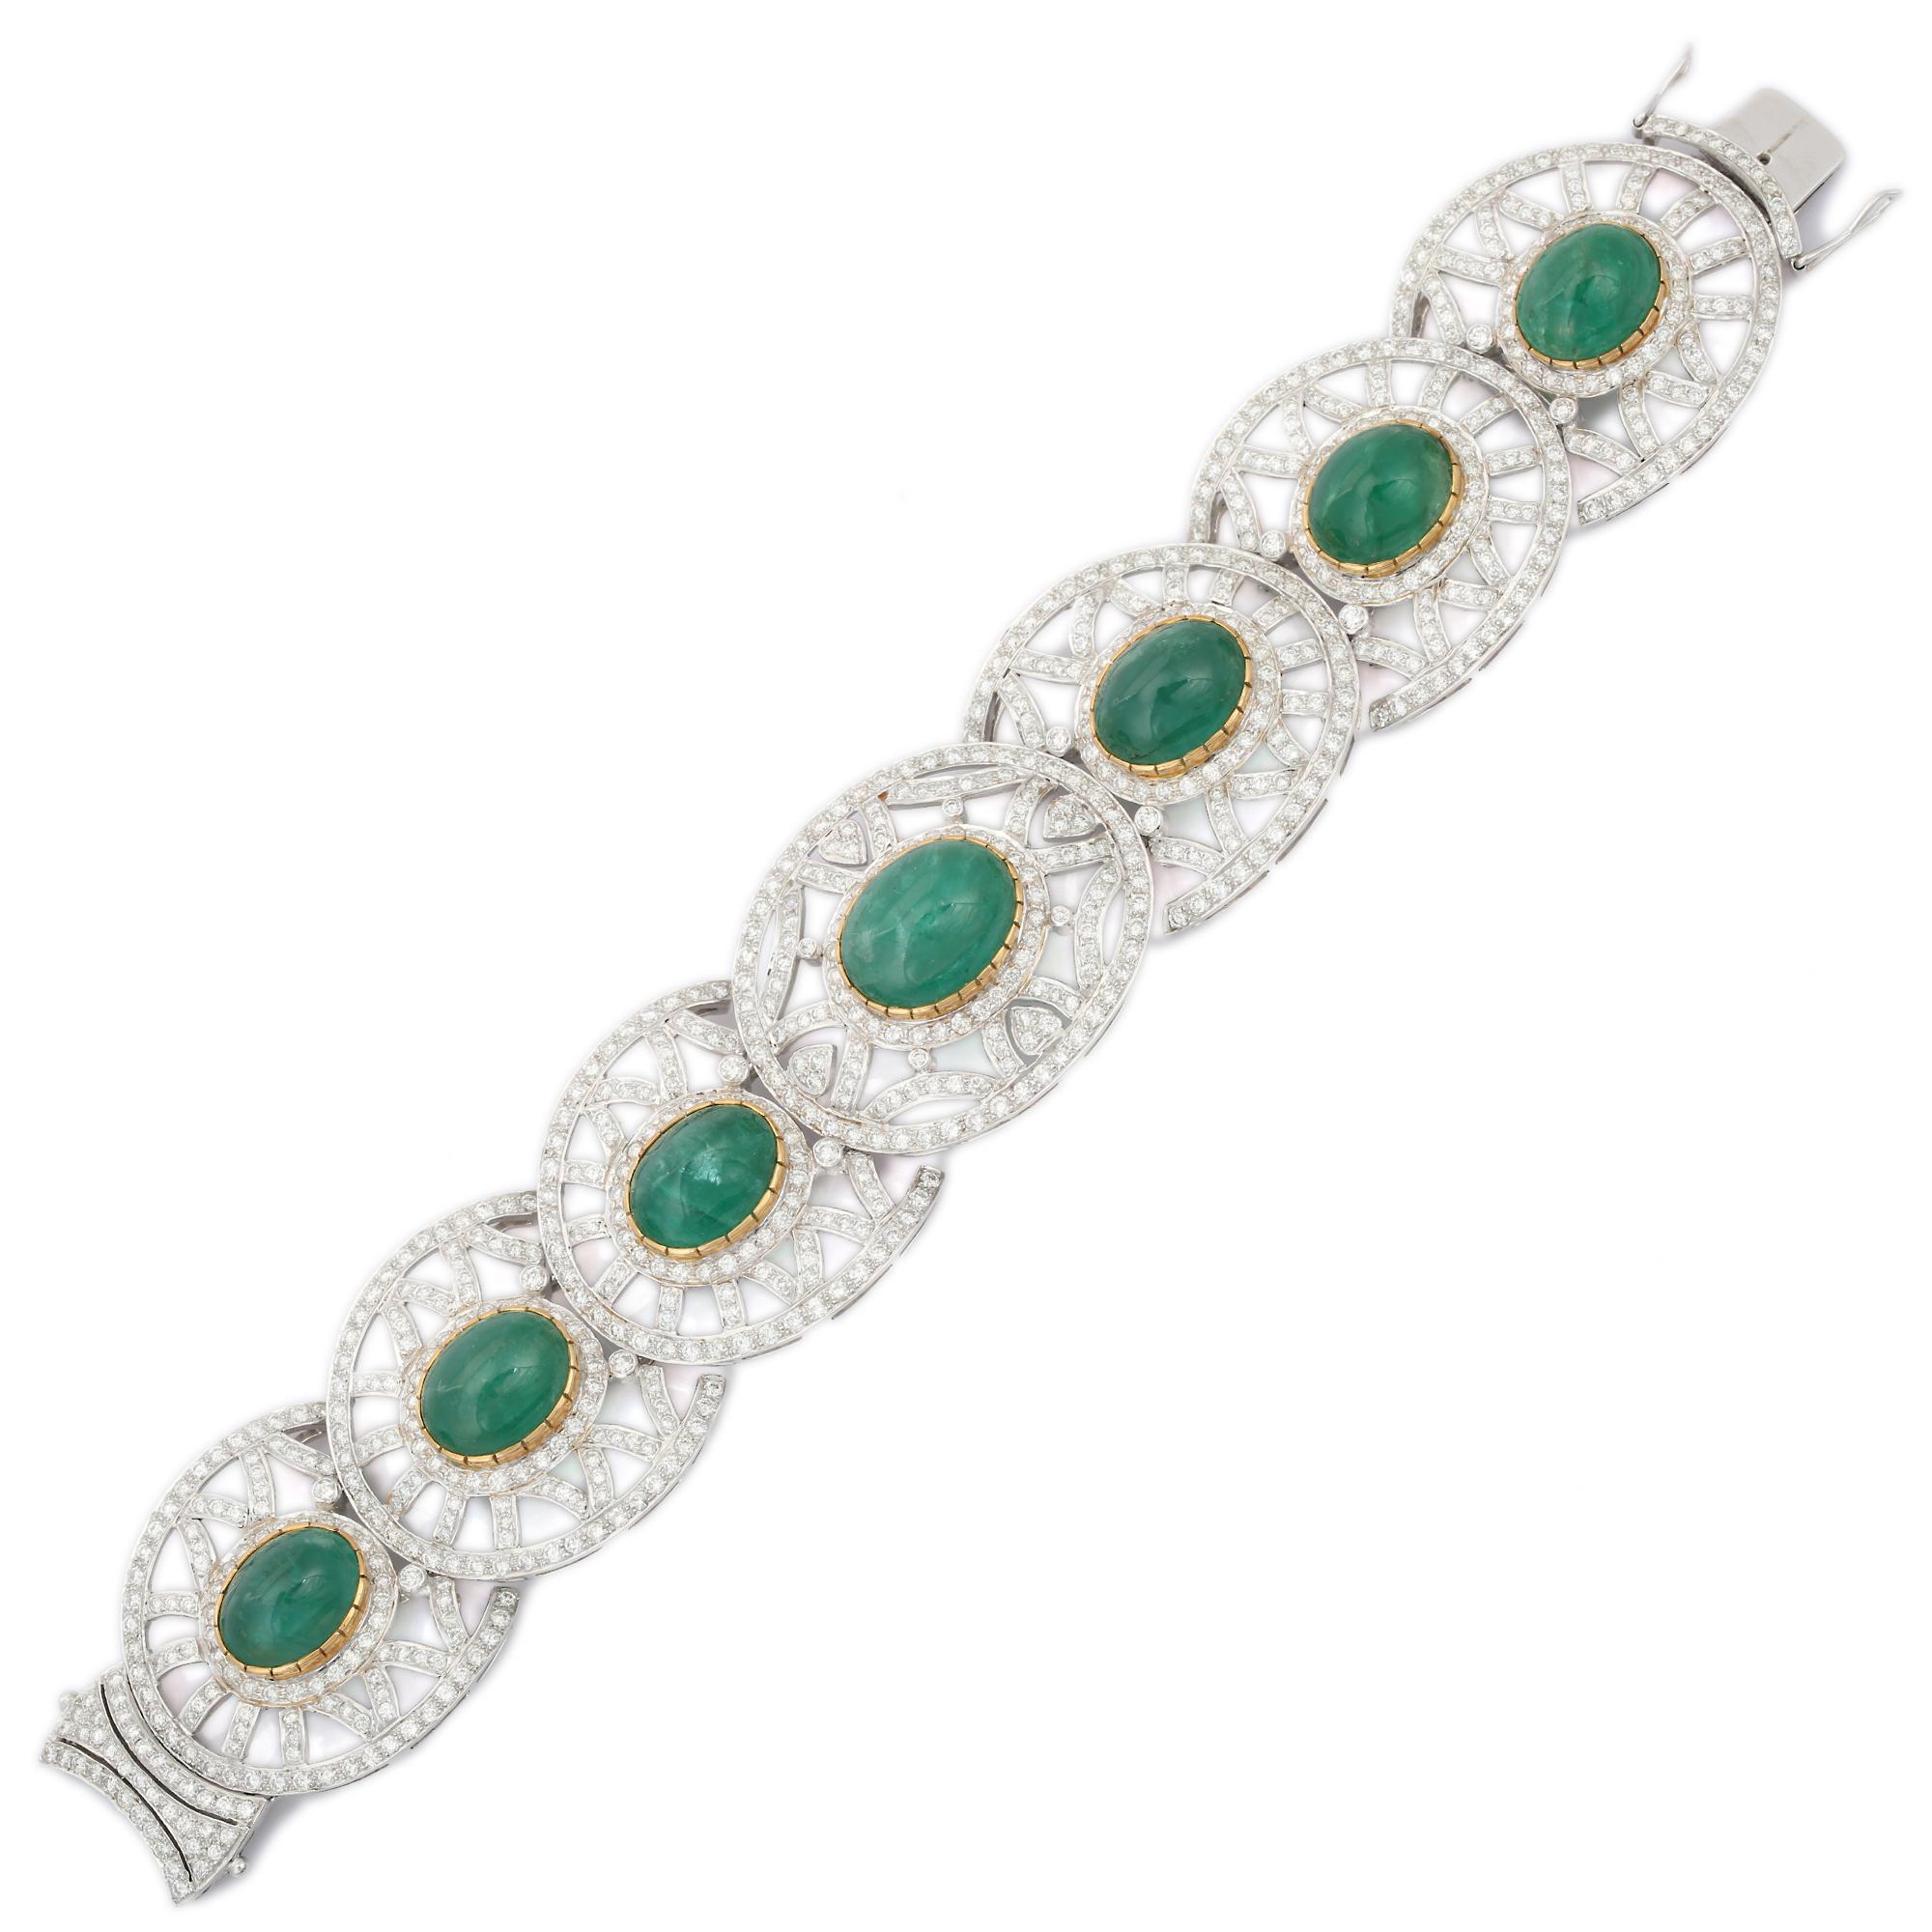 This Statement Jewelry Emerald Diamond Fine Bracelet in 18K gold showcases 7 endlessly sparkling cabochon emerald, weighing 53 carat and  diamonds weighing 12.5 carat. It measures 7.5 inches long in length. 
Emerald enhances the intellectual